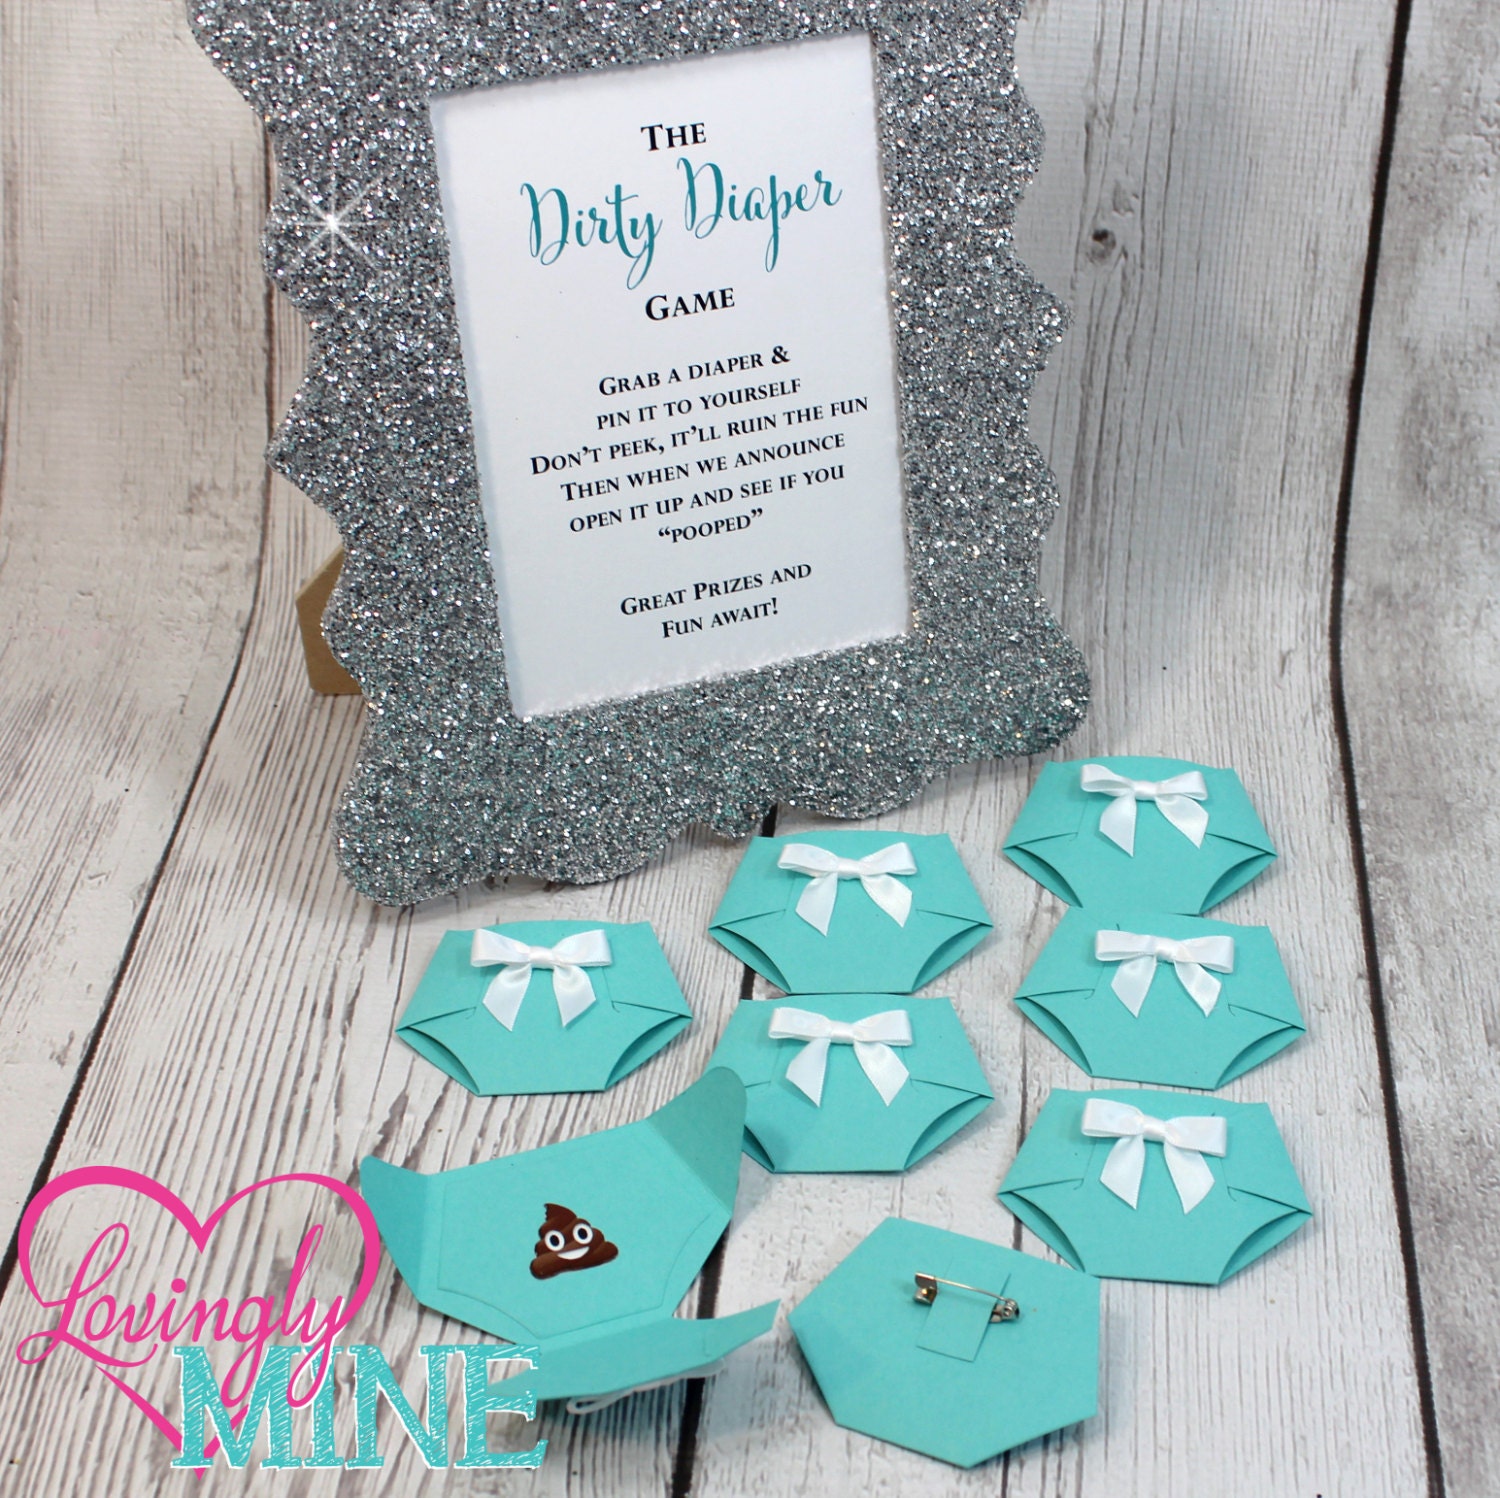 Dirty Diaper Game Light Teal Diaper Pins and matching Silver